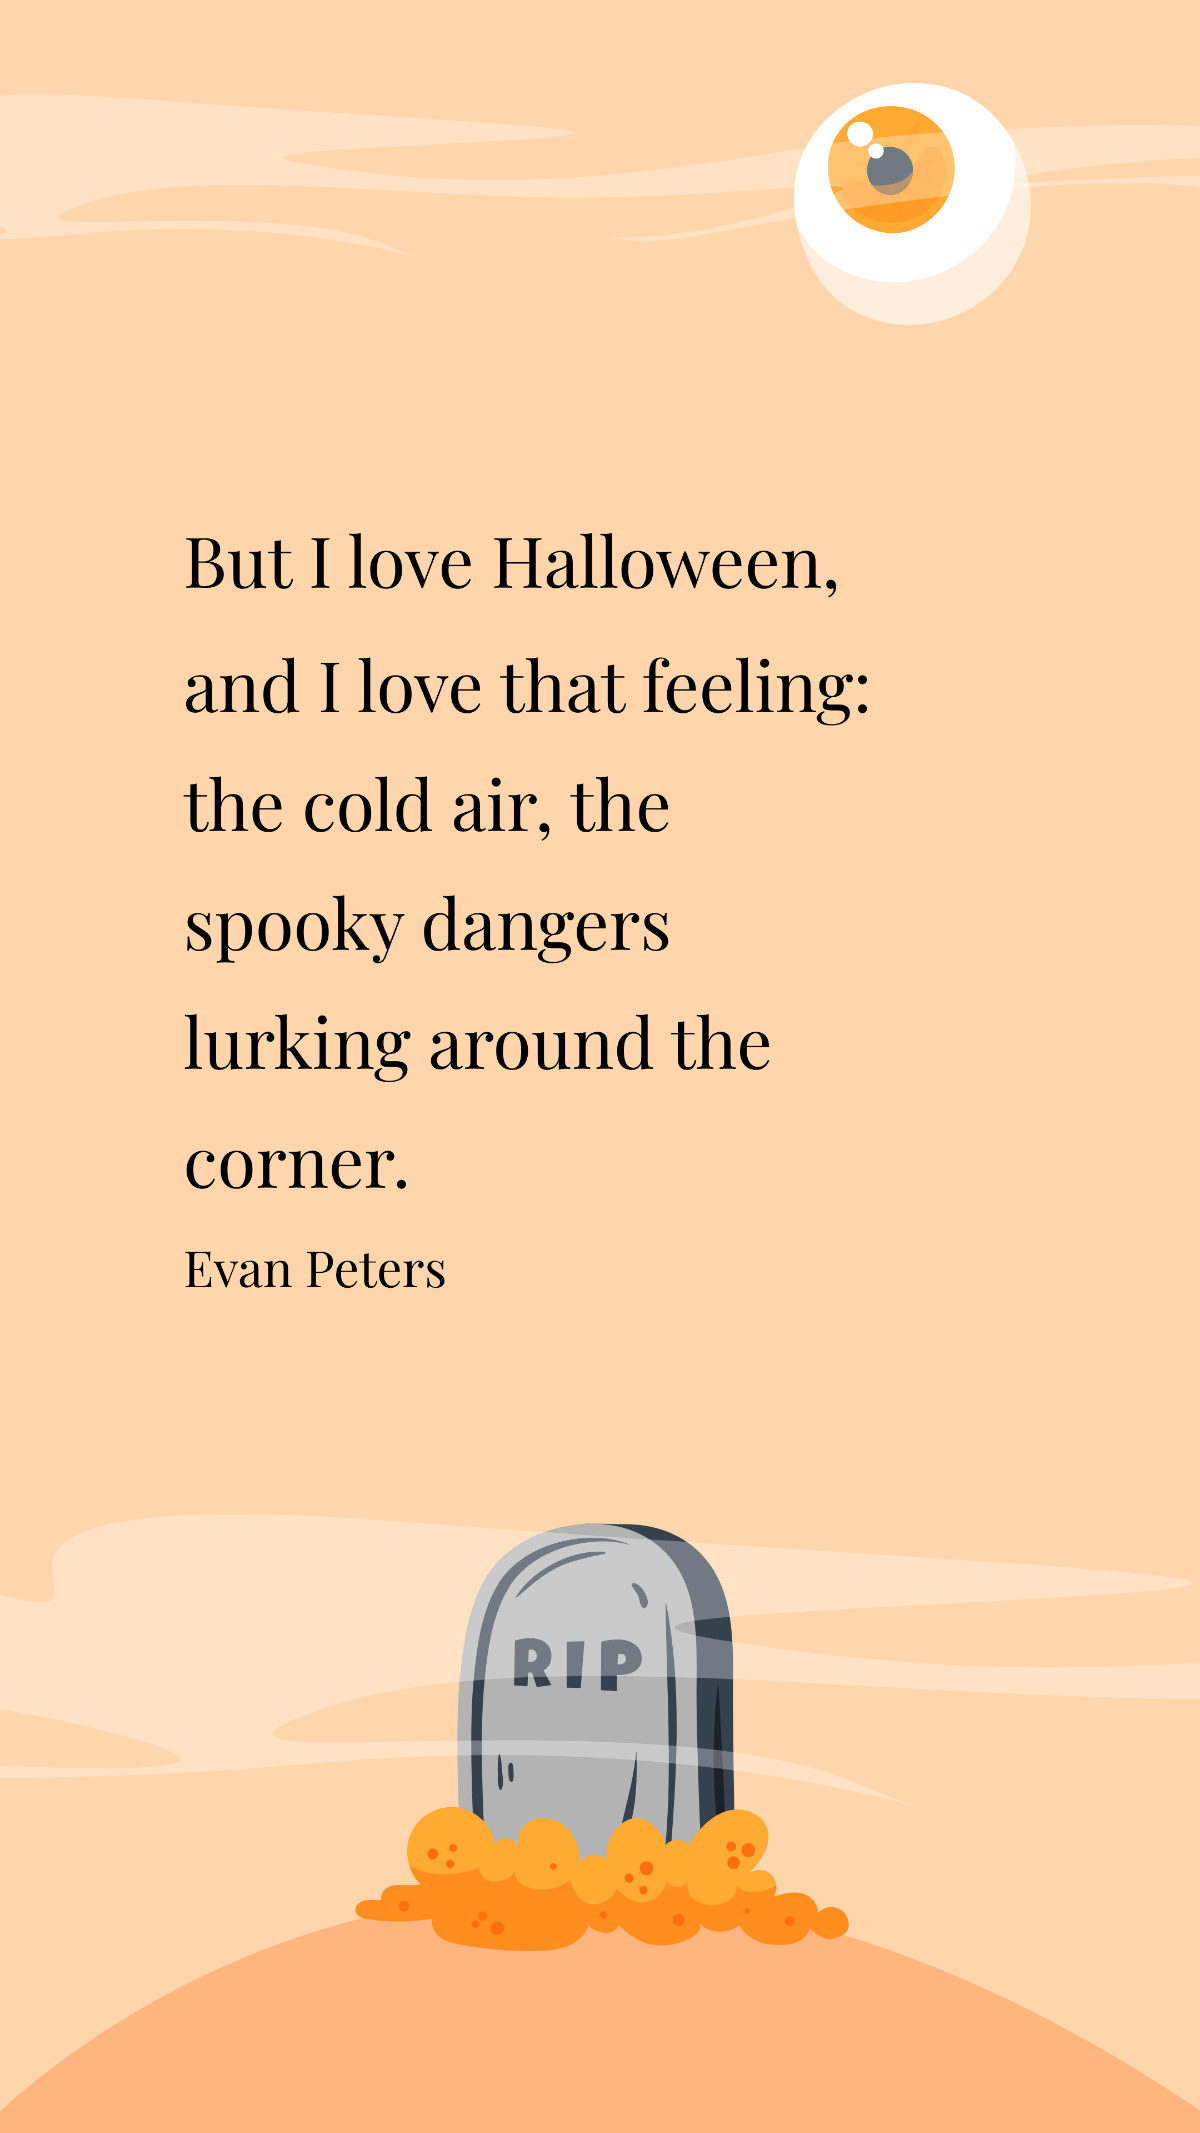 Evan Peters- But I love Halloween, and I love that feeling: the cold air, the spooky dangers lurking around the corner.  Template